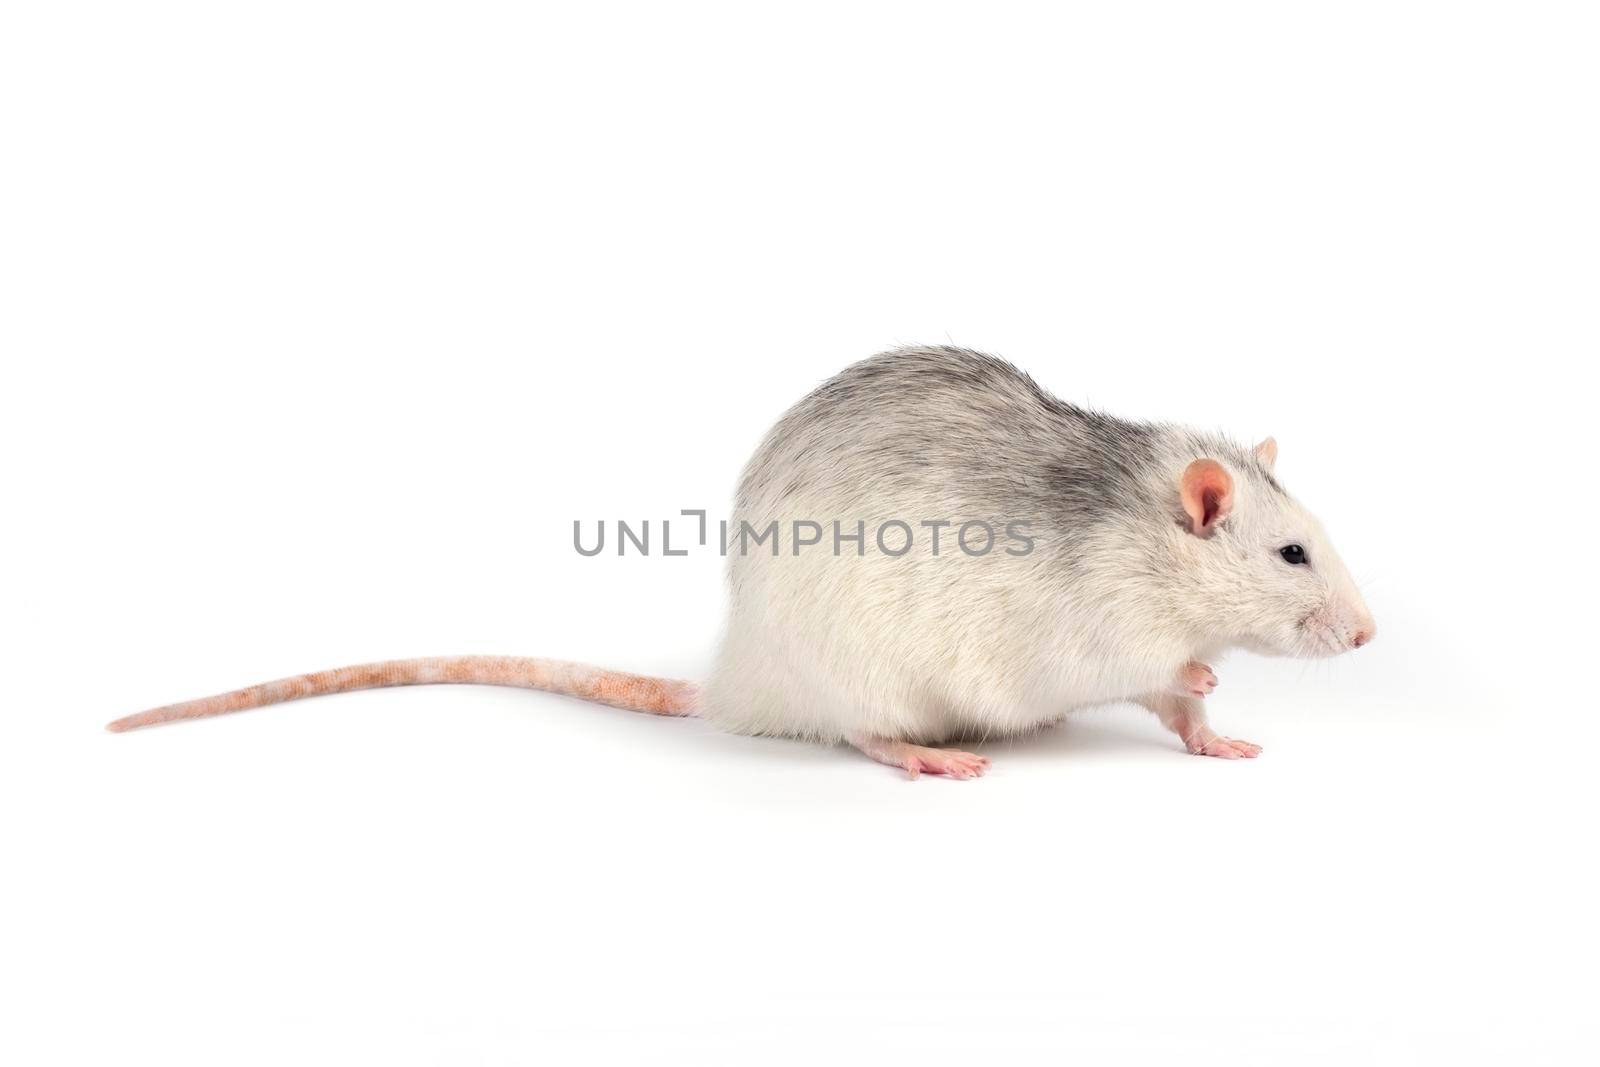 Funny and fat gray rat with long tail isolated on white background. Home pets concept. Rat full length cut out.